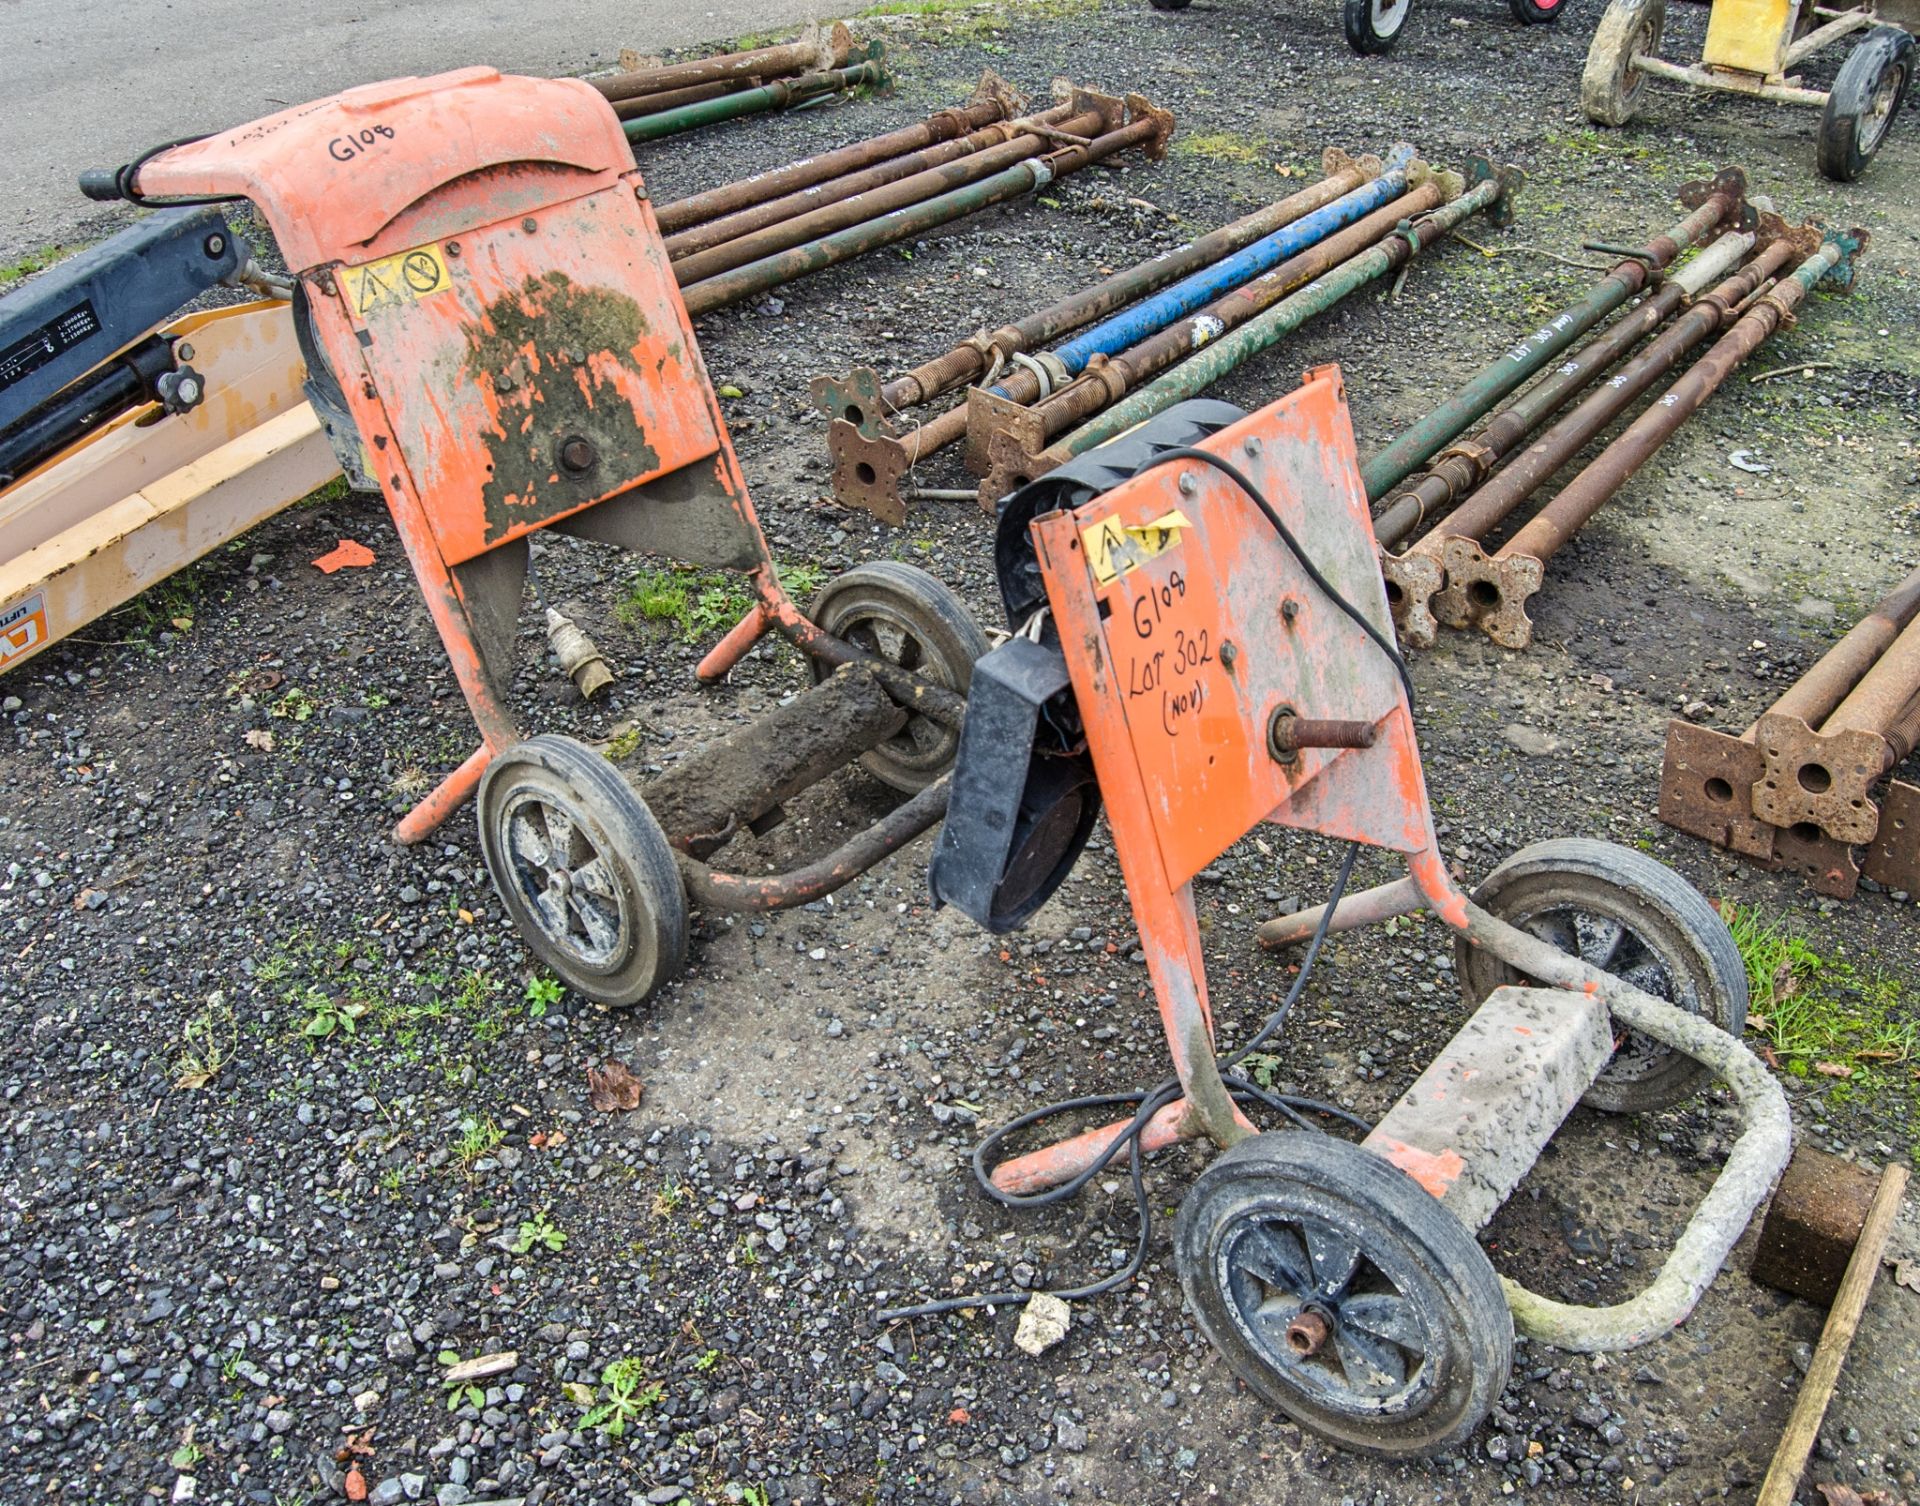 2 - Belle Minimix 150 110v cement mixers ** Both with no drums and one with motor parts missing **